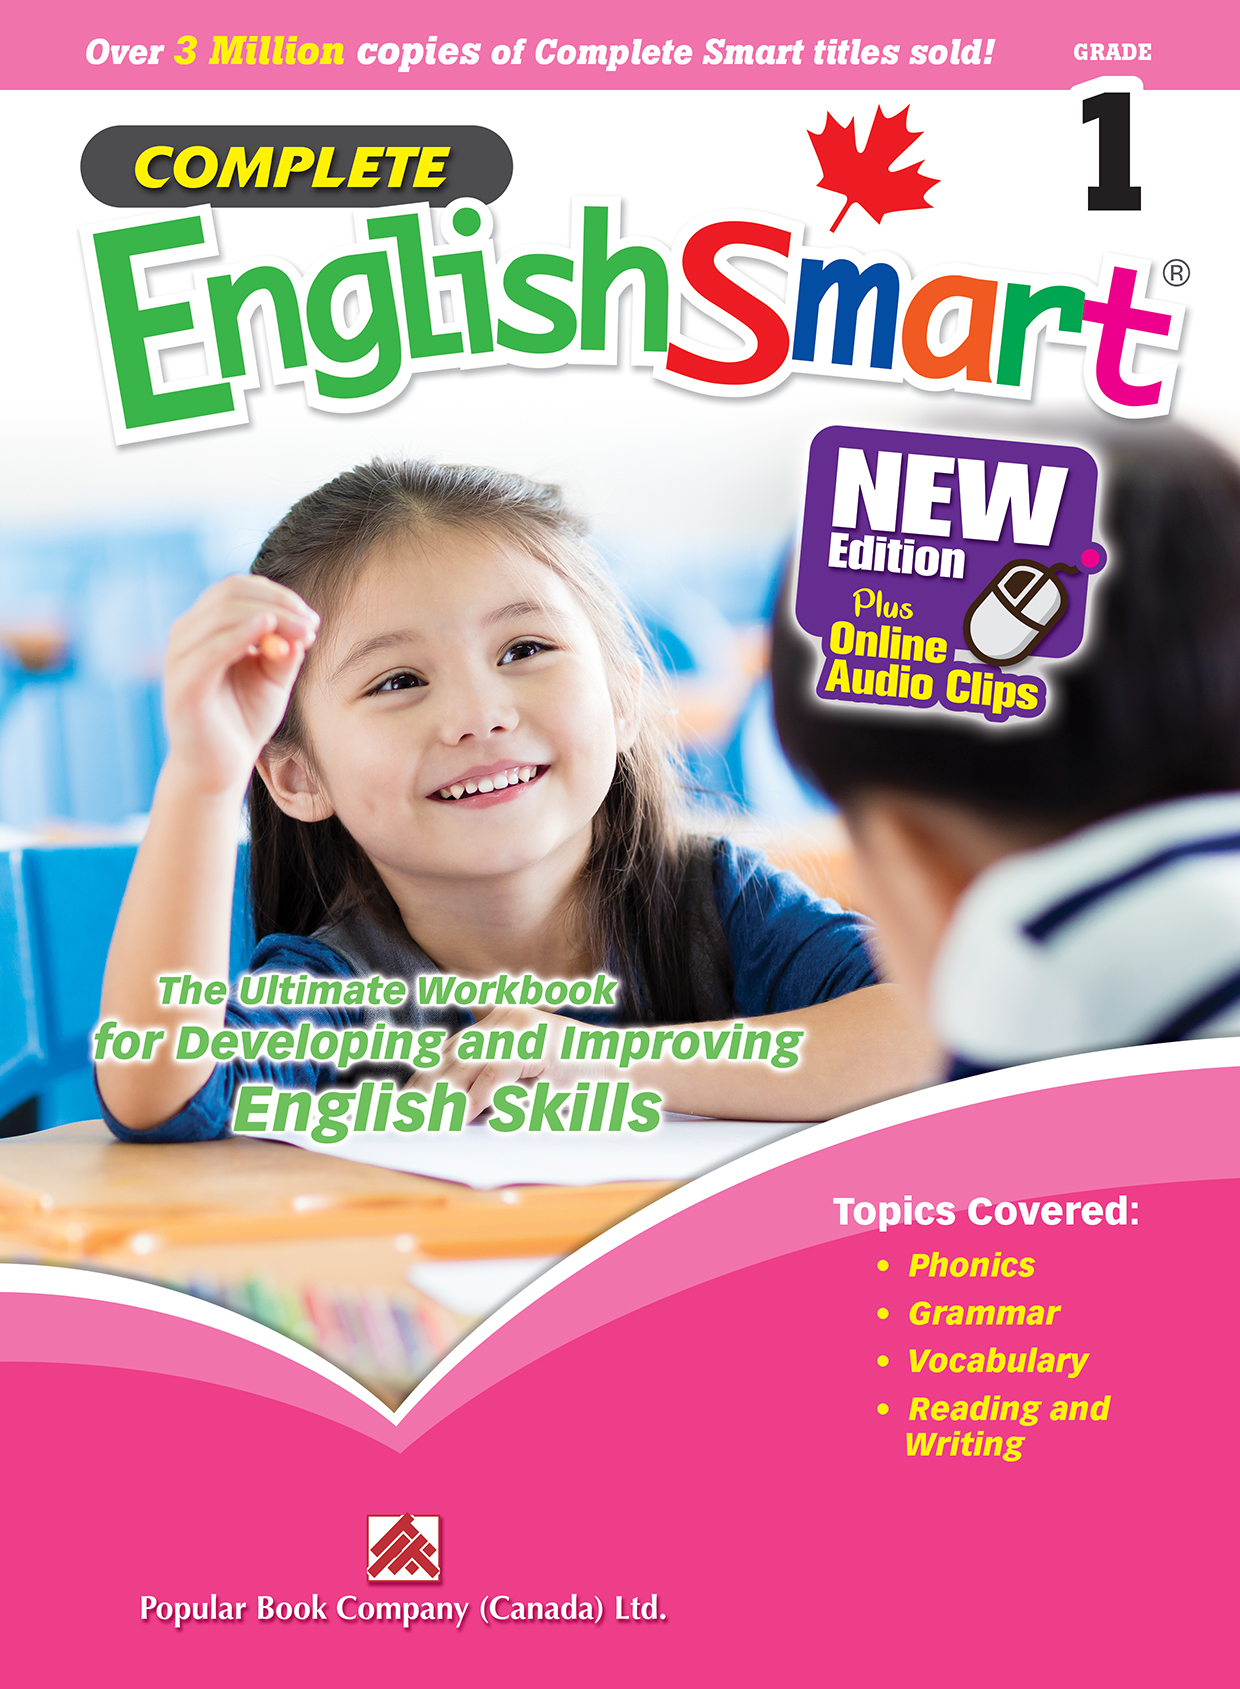 grade-3-english-smart-kids-grade-05-maths-smartkids-are-you-looking-for-printable